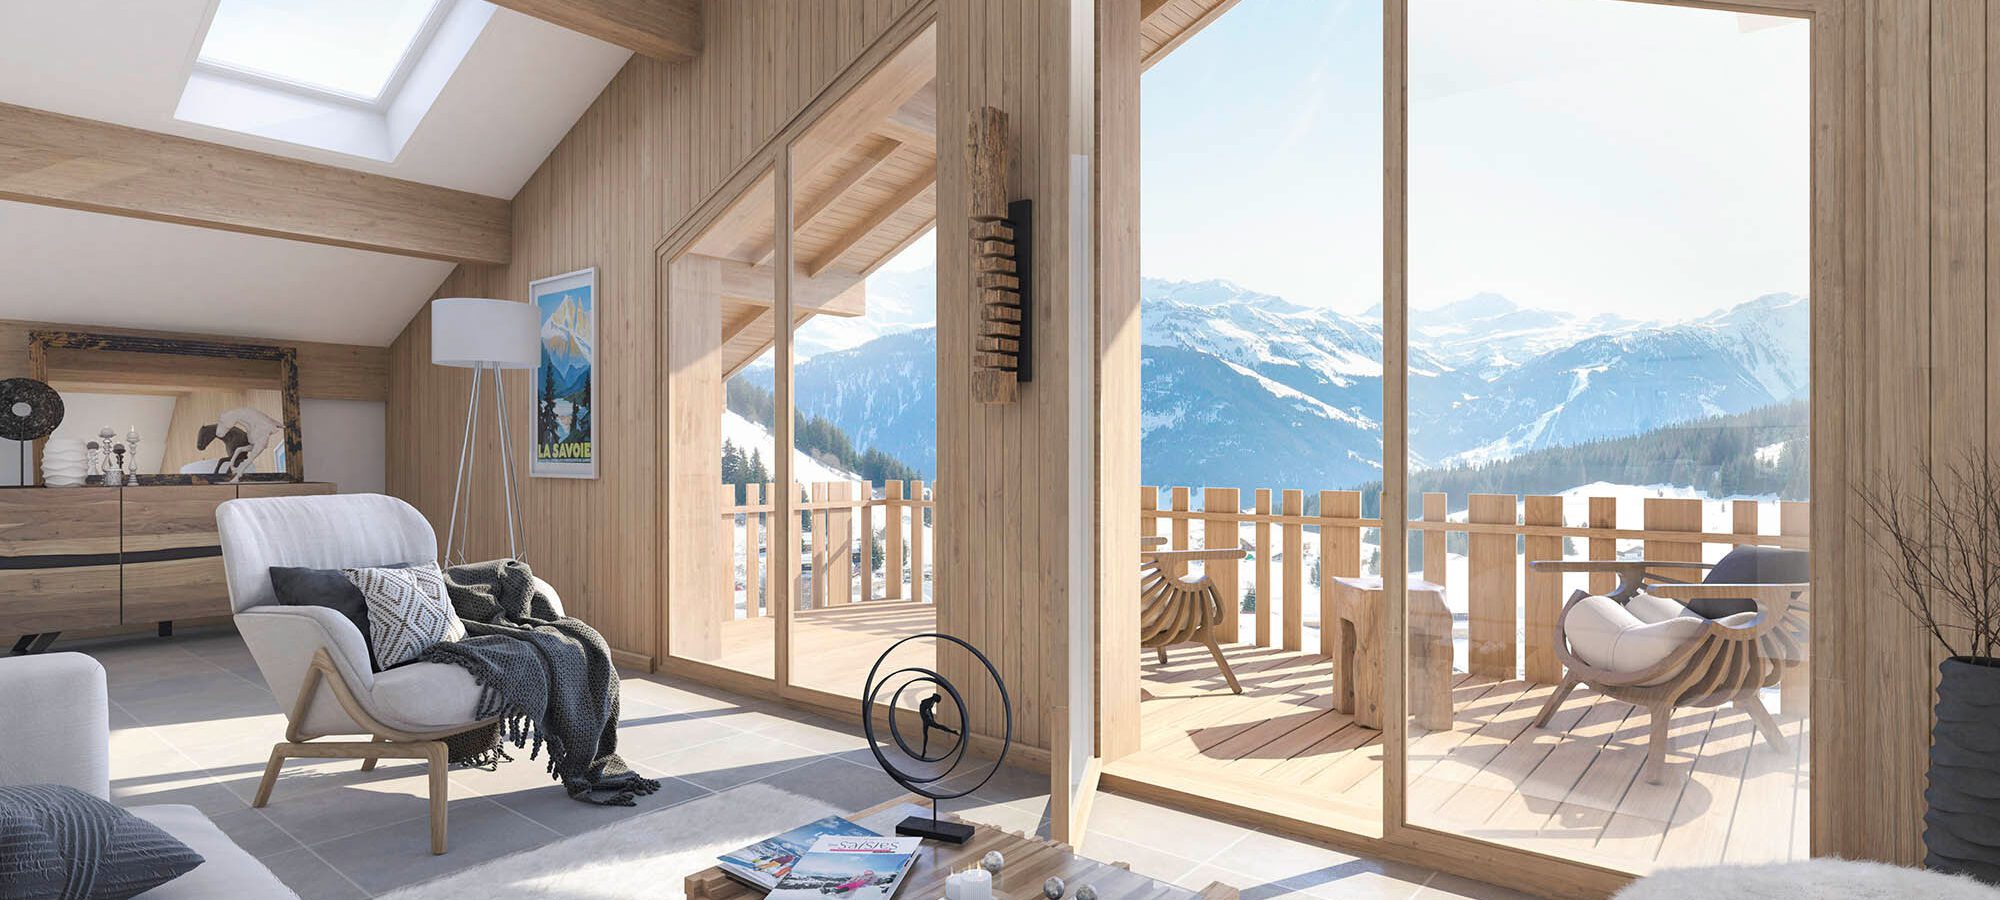 Perspective chalet